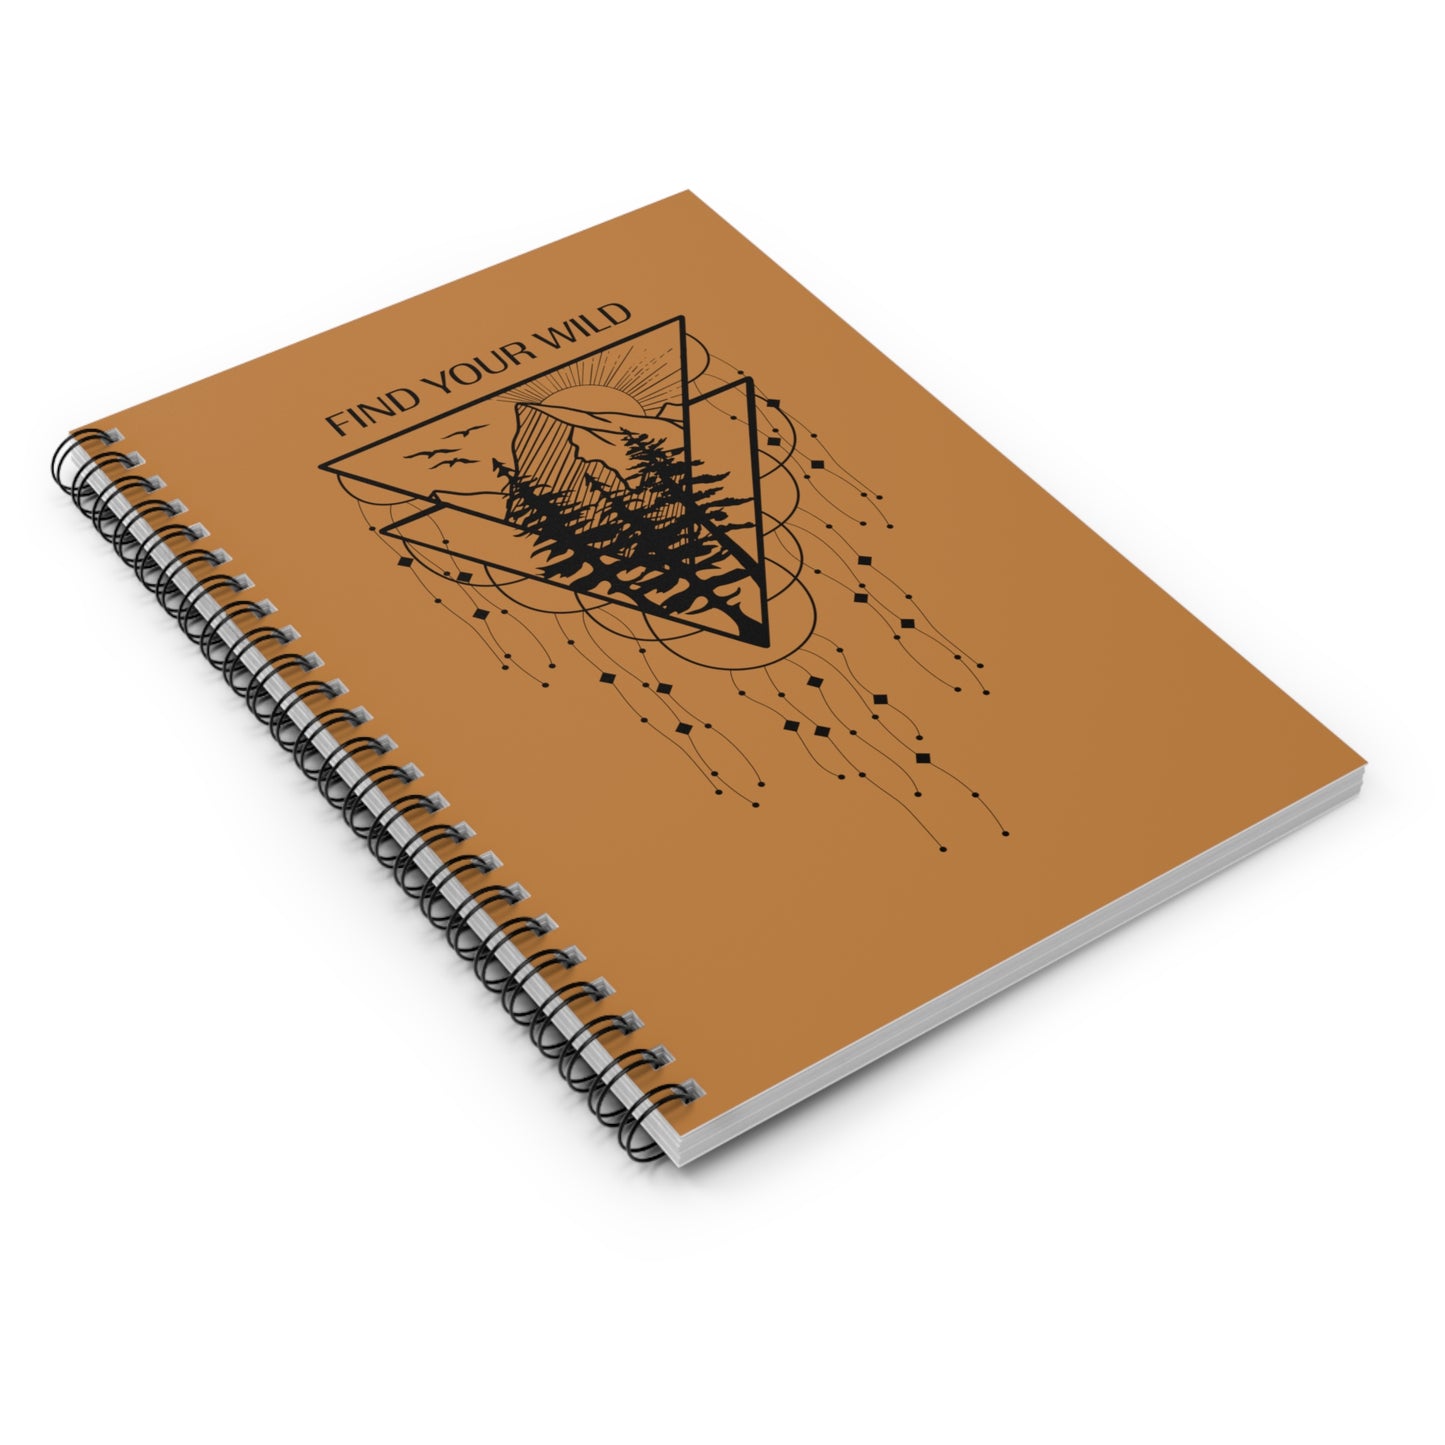 Find Your Wild Spiral Notebook - Ruled Line